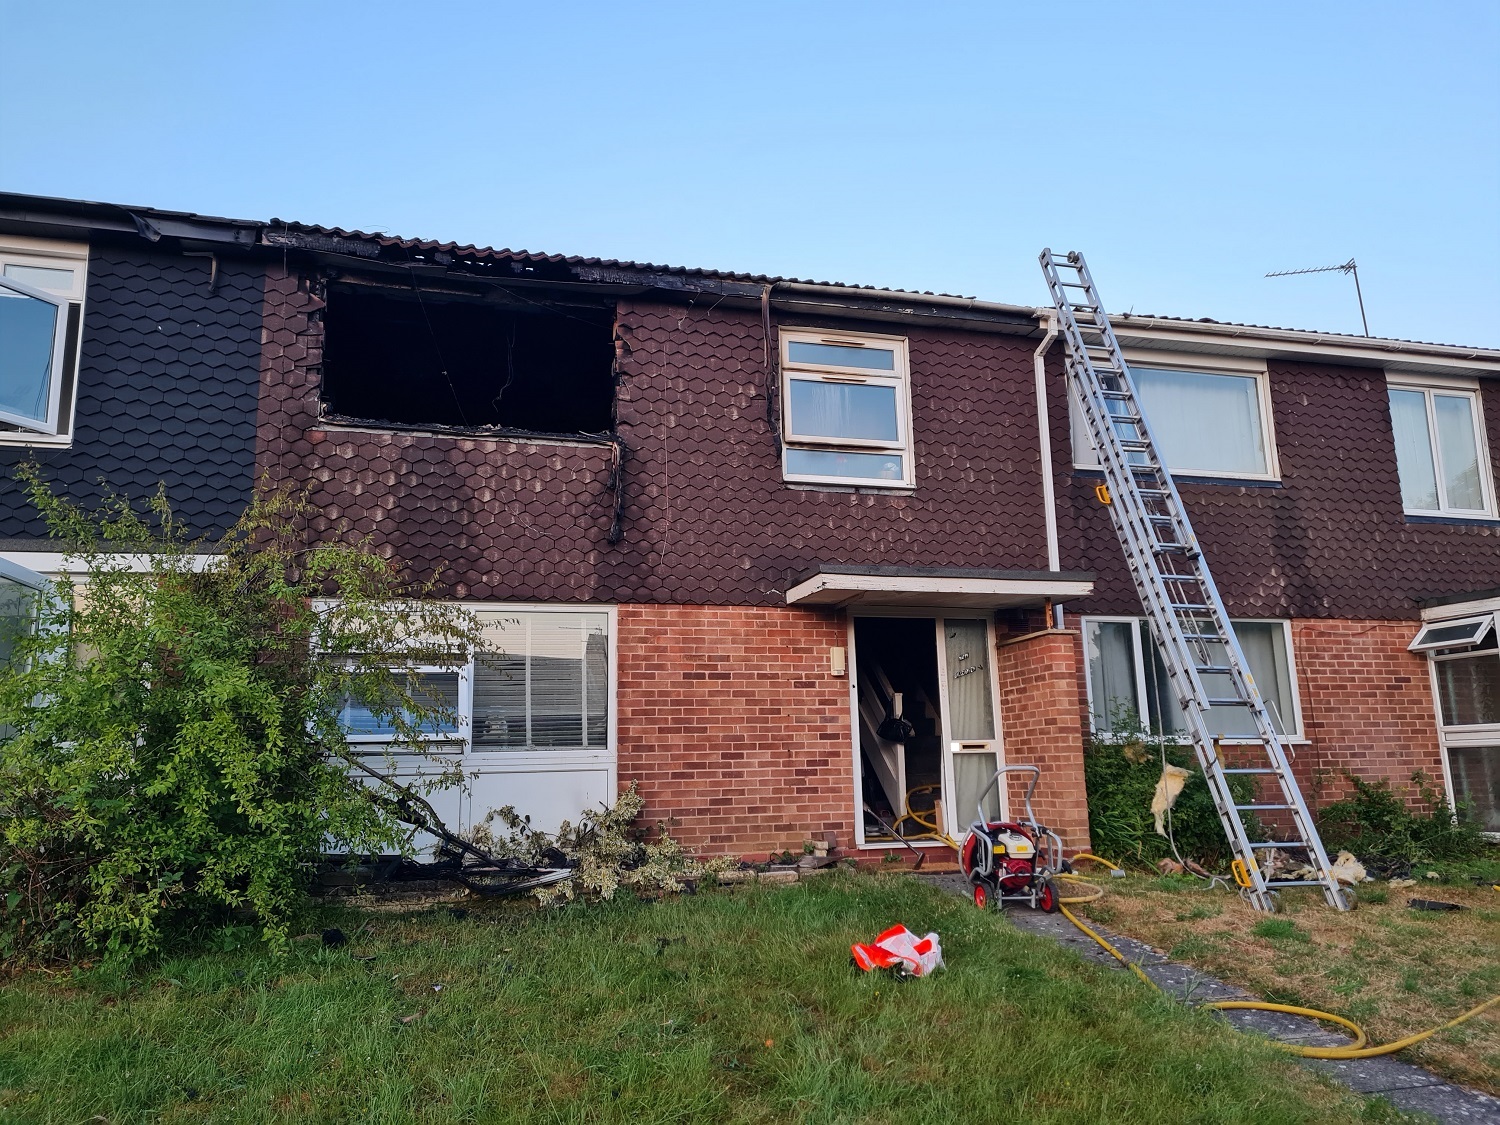 HWFRS reminder over use of extension leads